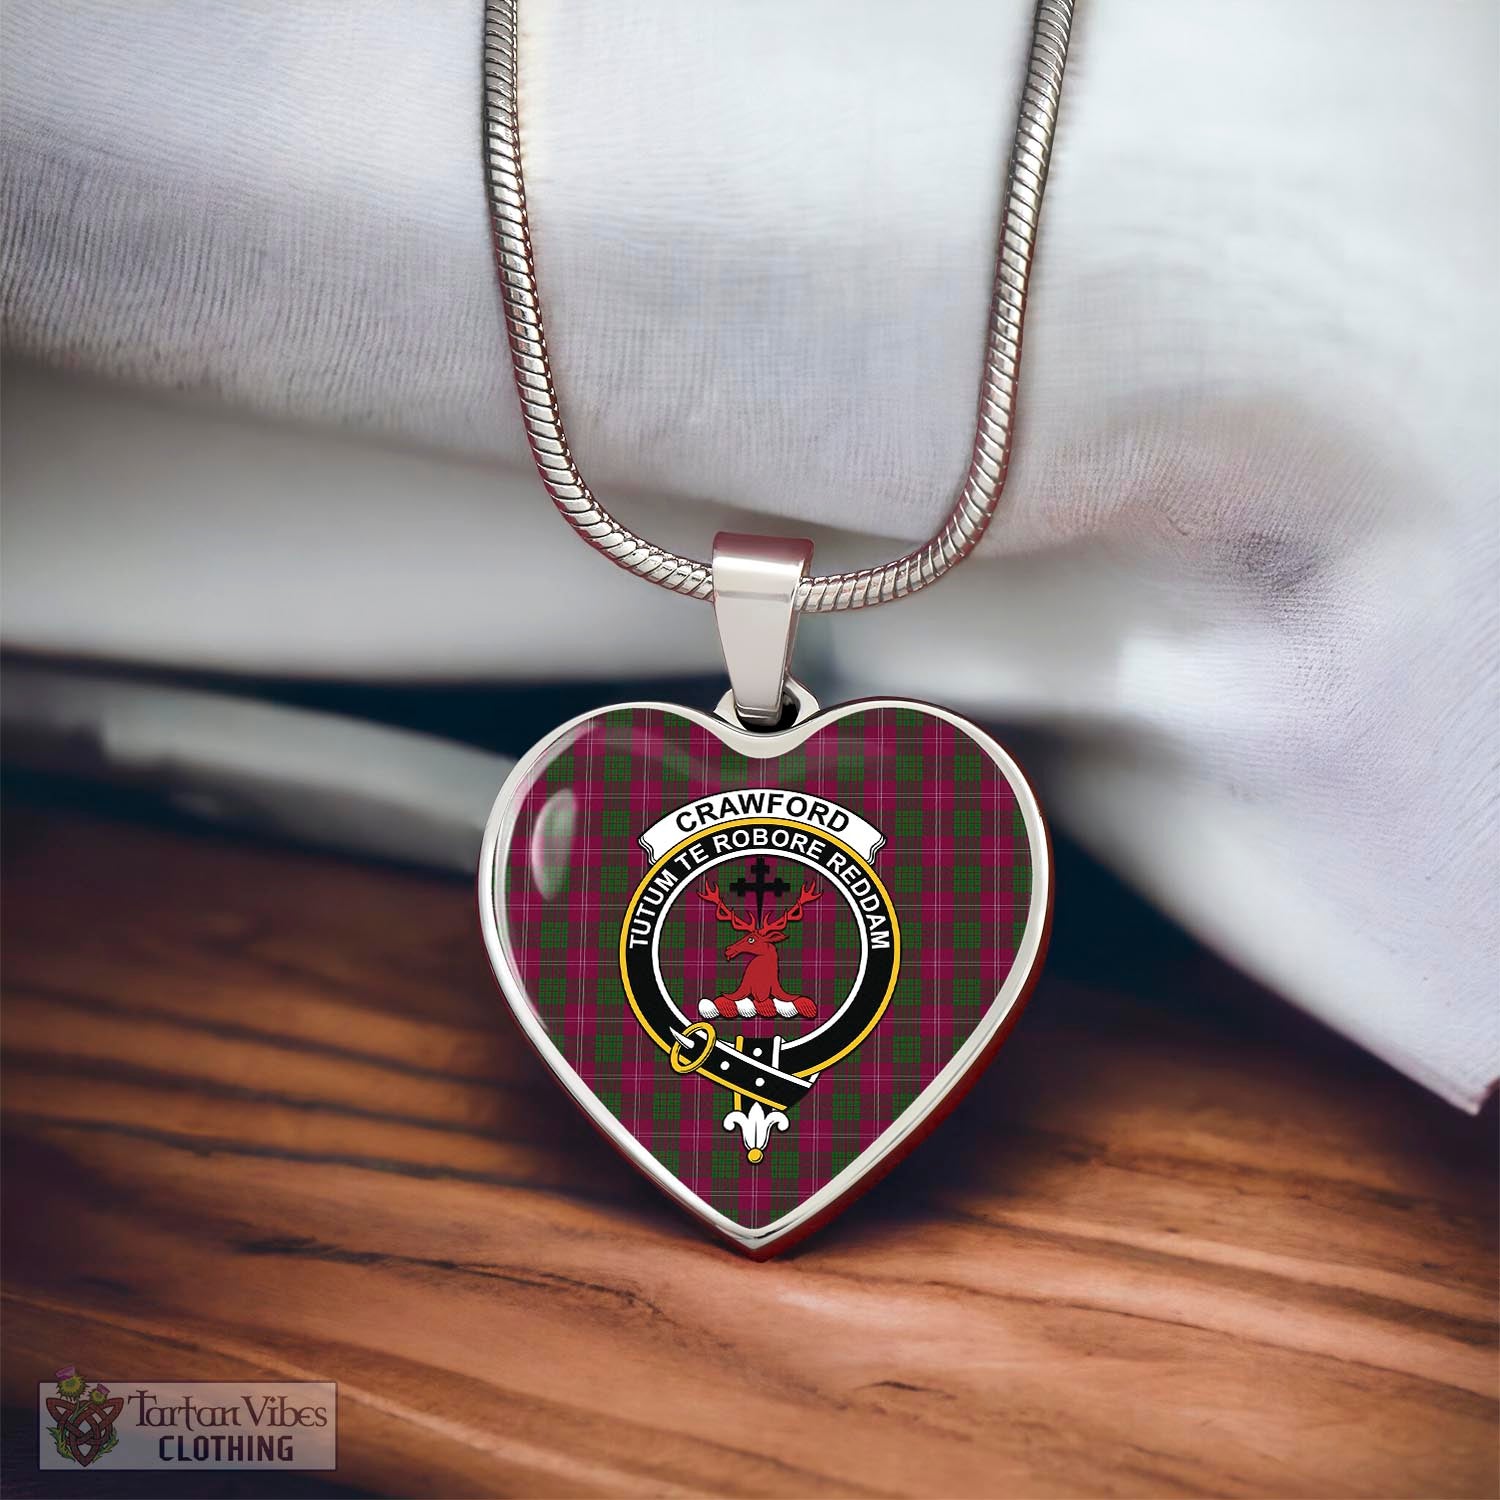 Tartan Vibes Clothing Crawford Tartan Heart Necklace with Family Crest